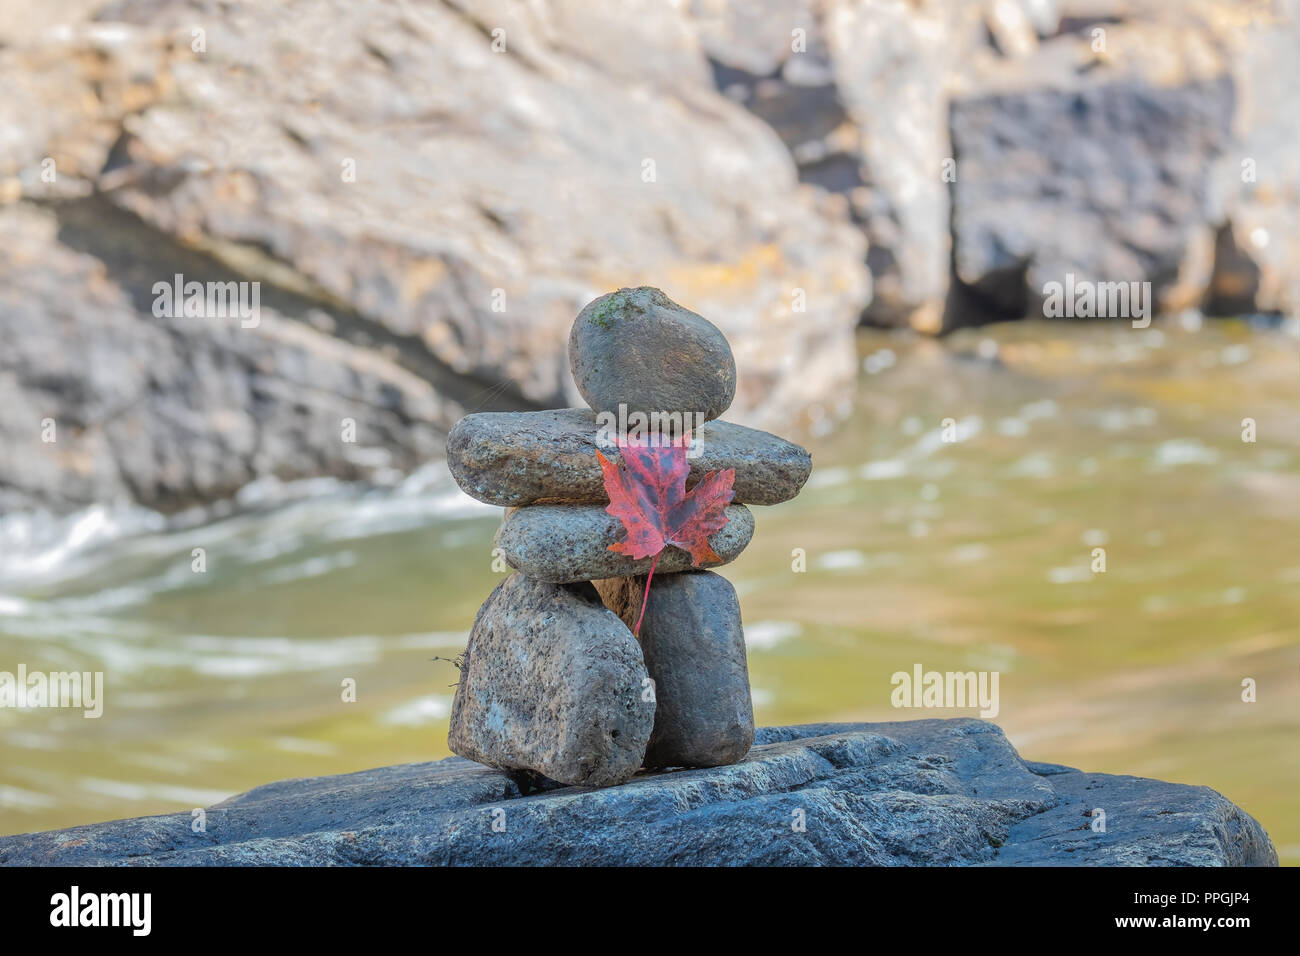 A traditional Inuit method of creating a navigational marker in areas with few natural landmarks, the inuksuk has become a symbol of Canada. Stock Photo